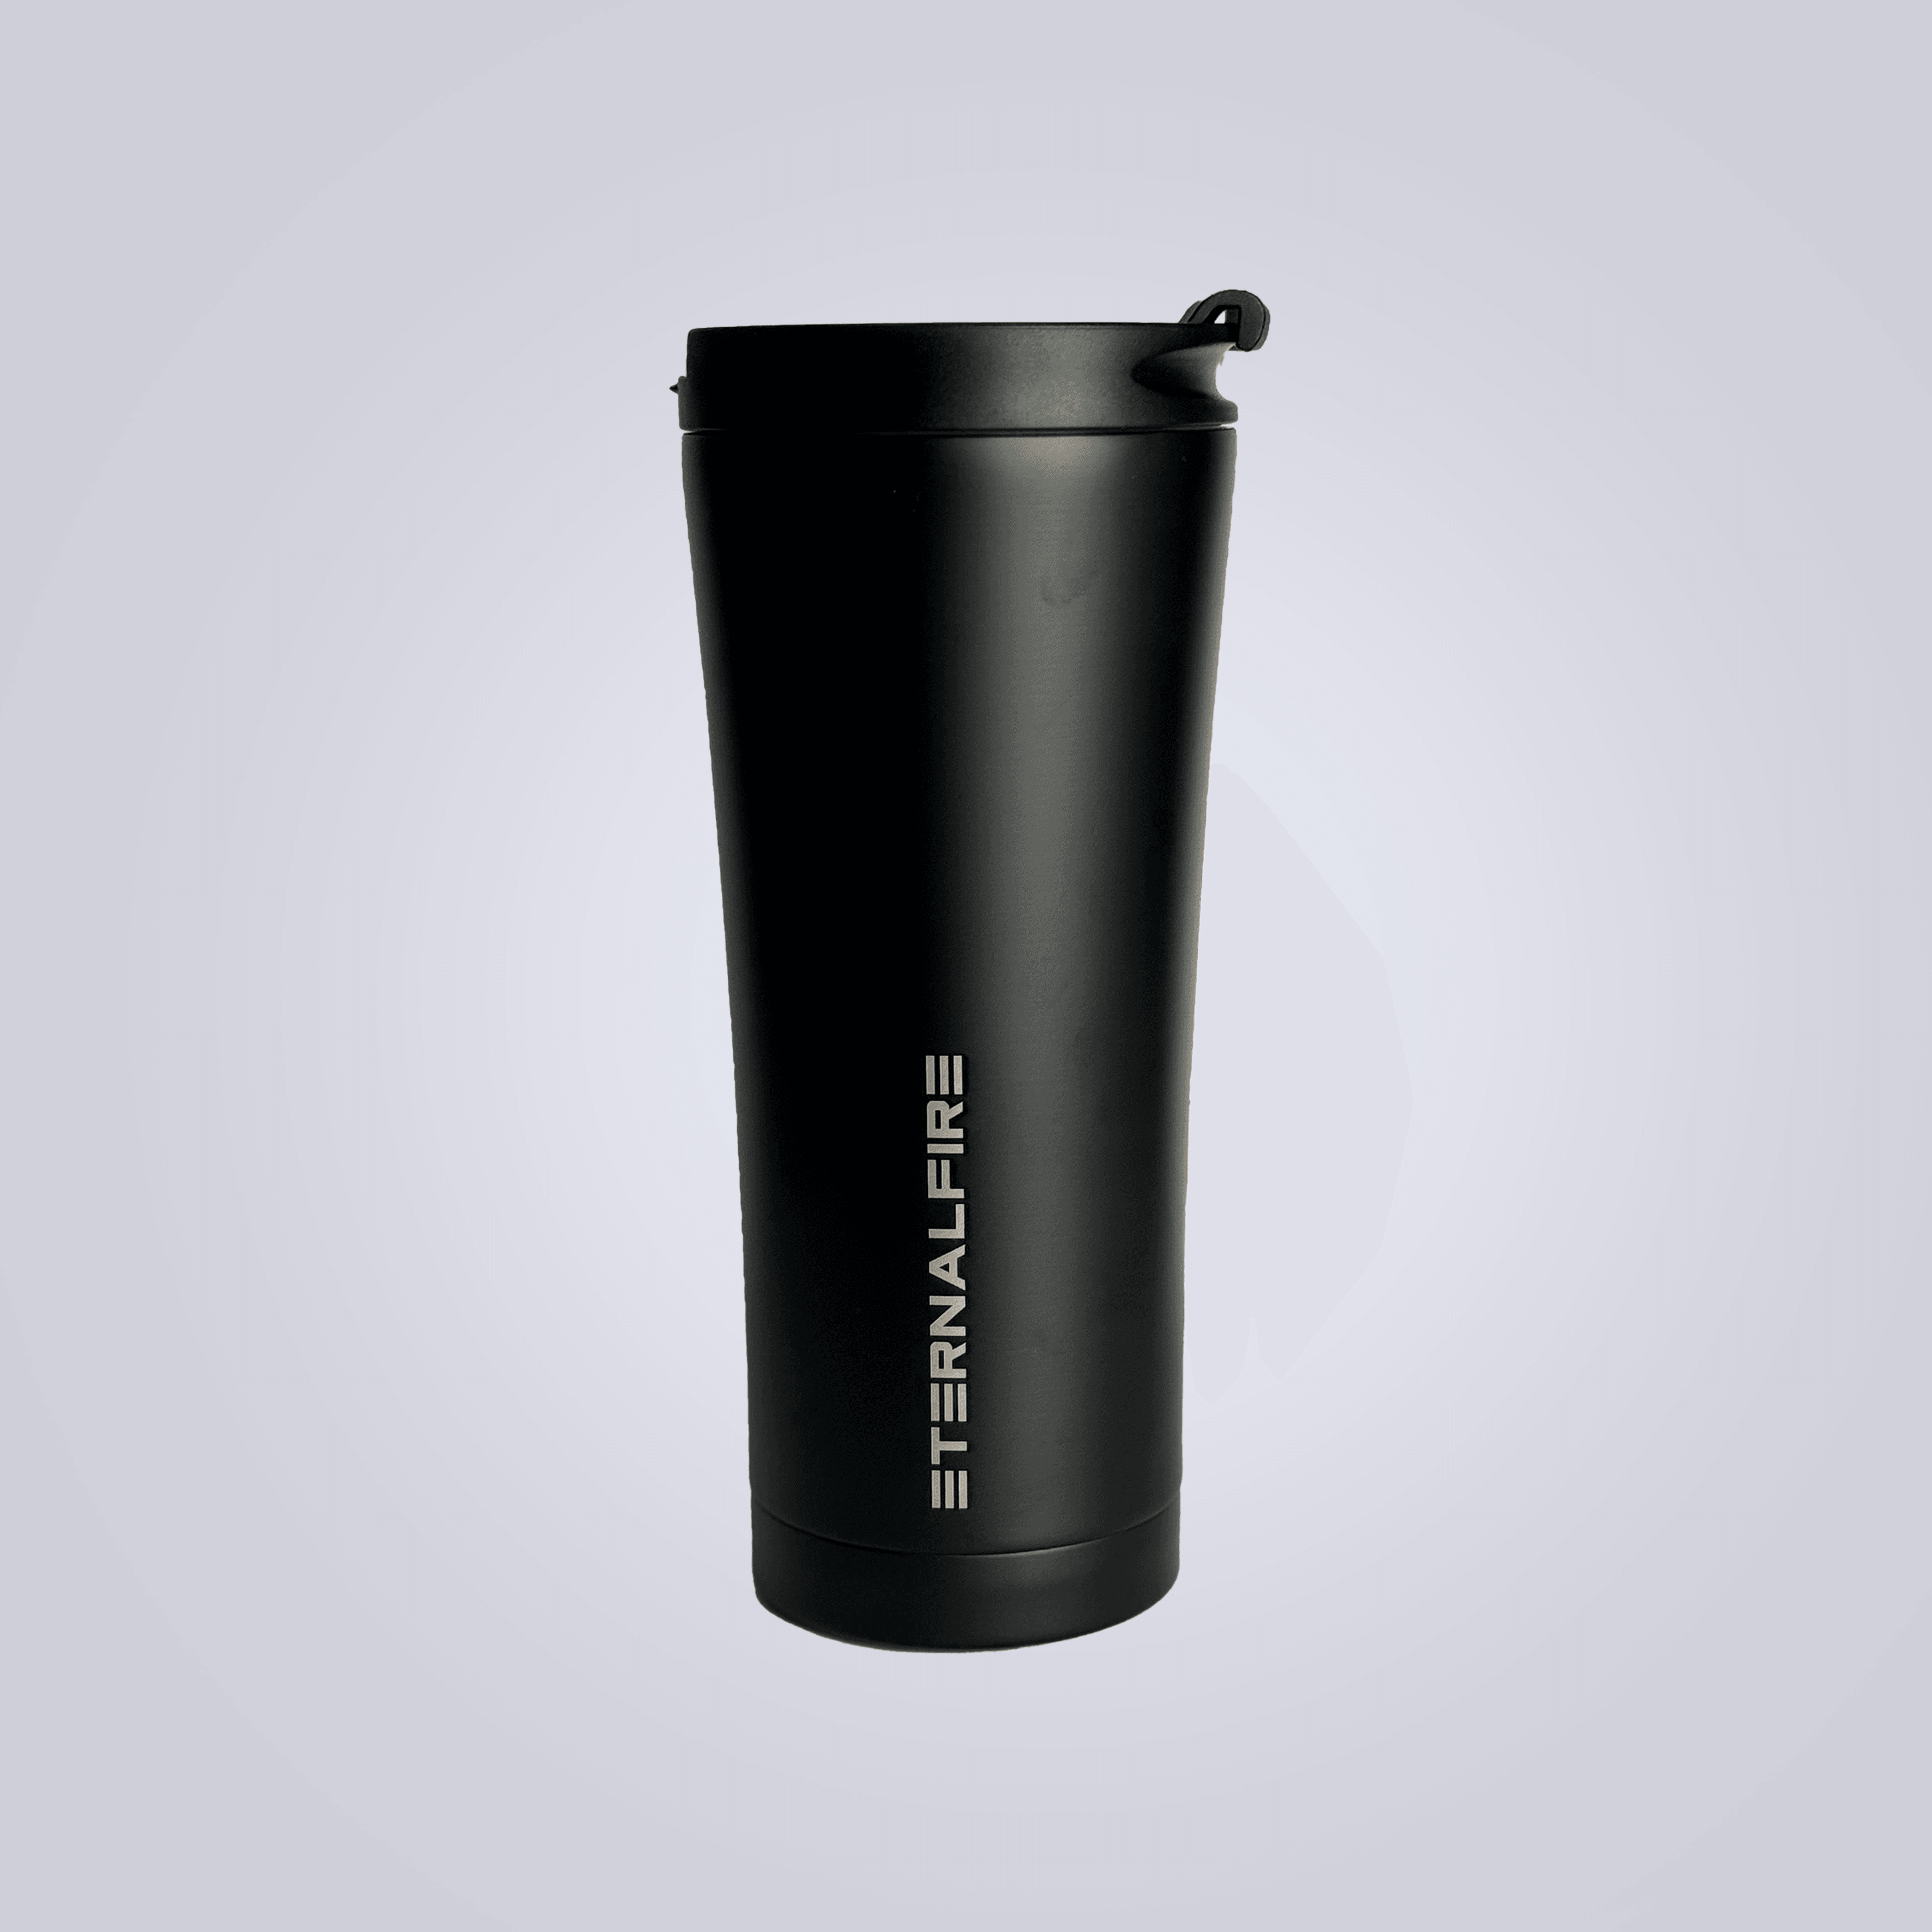 Eternal Fire Stainless Steel Thermos